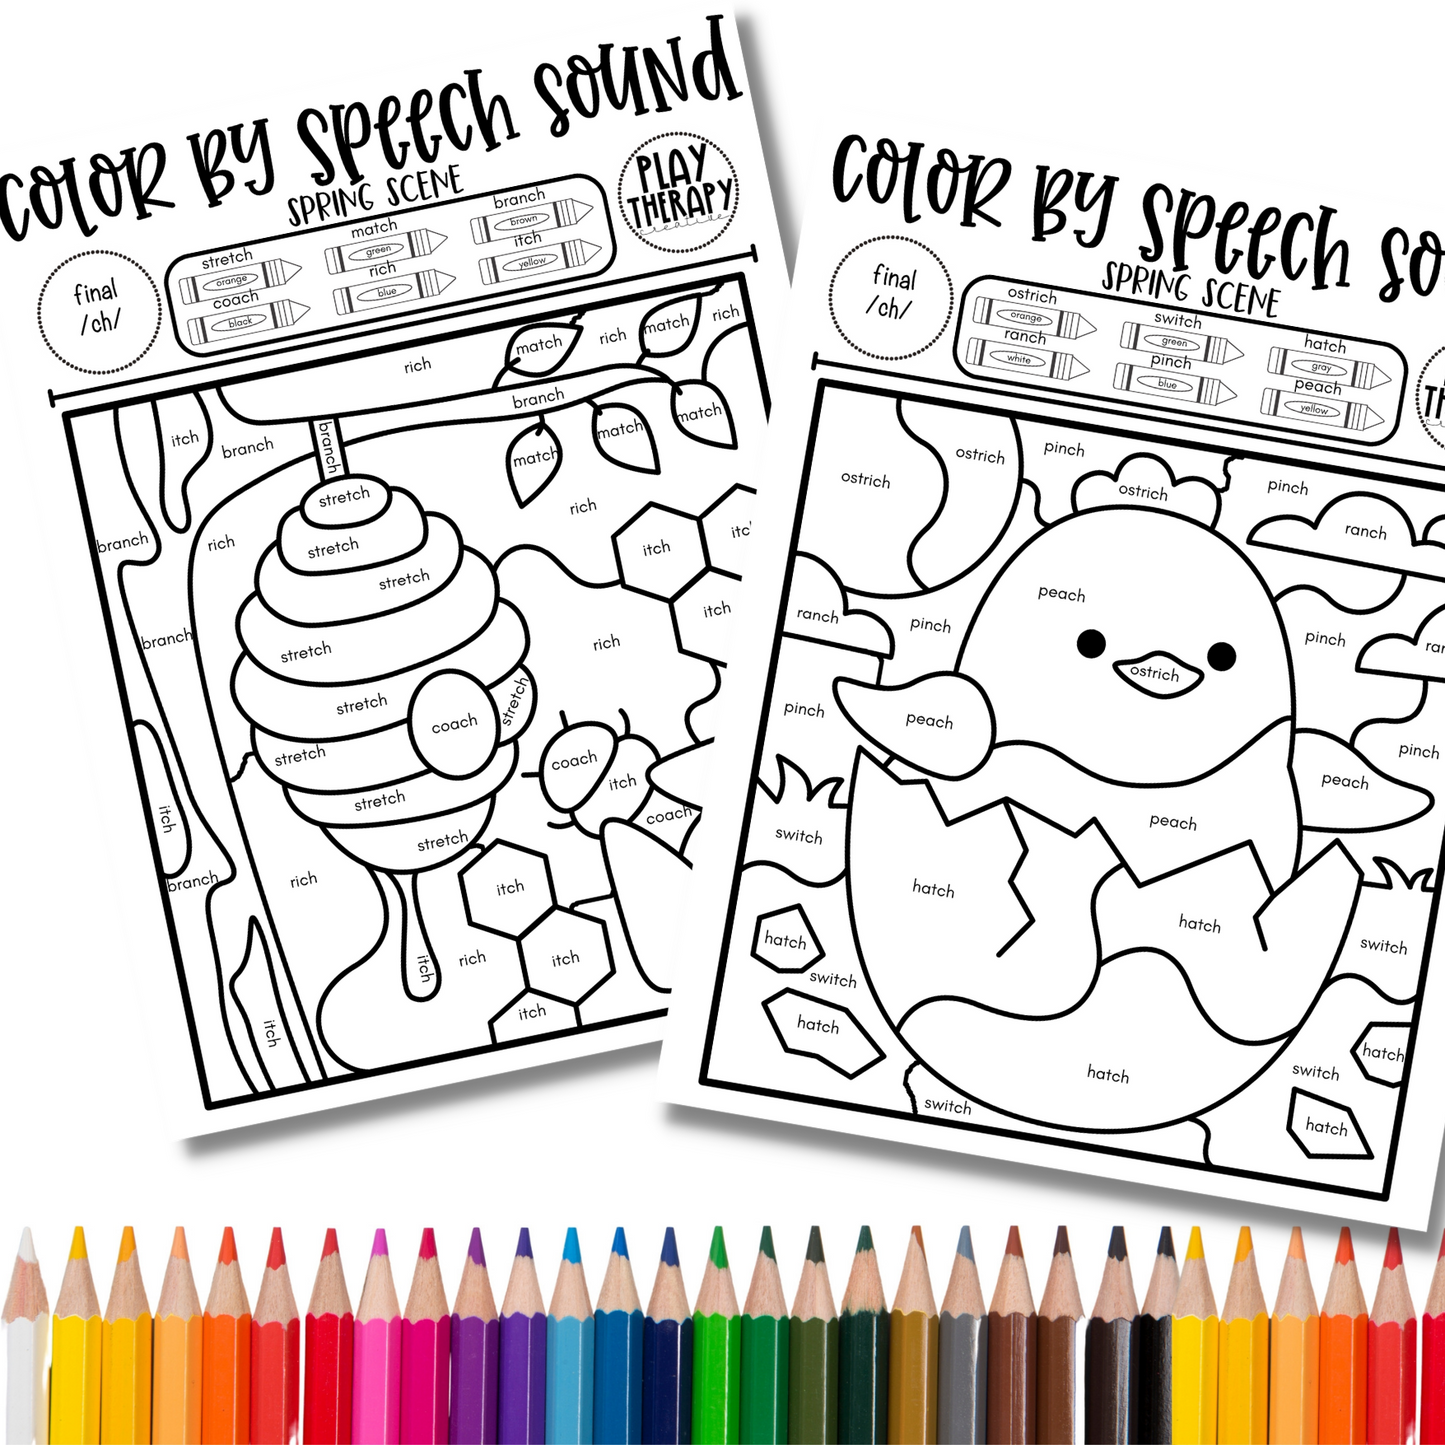 /ch/ Sound Spring Themed Color-by-Speech-Sounds for Speech Therapy